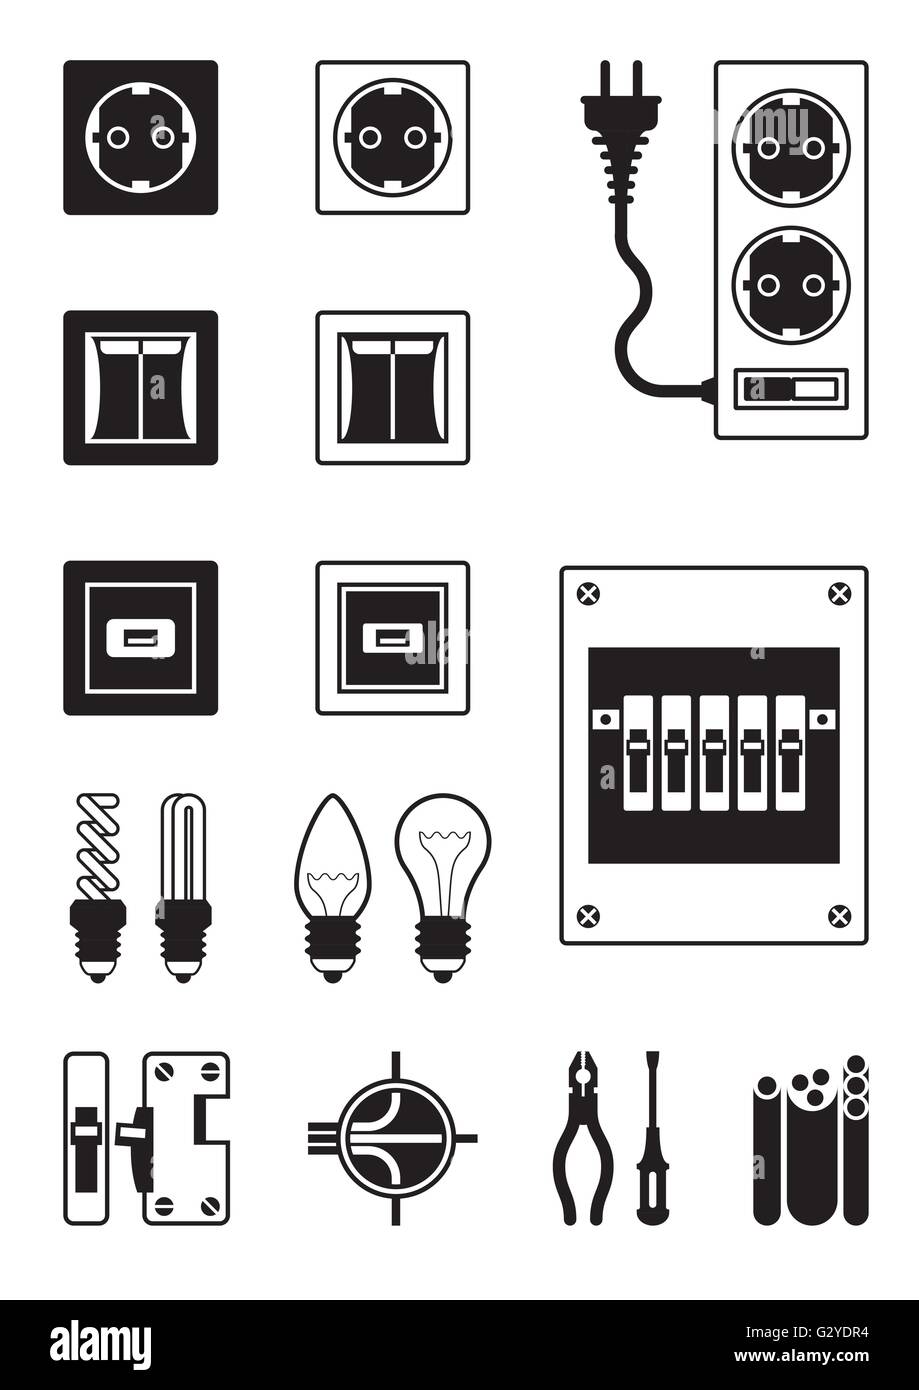 Electrical network devices - vector illustration Stock Vector